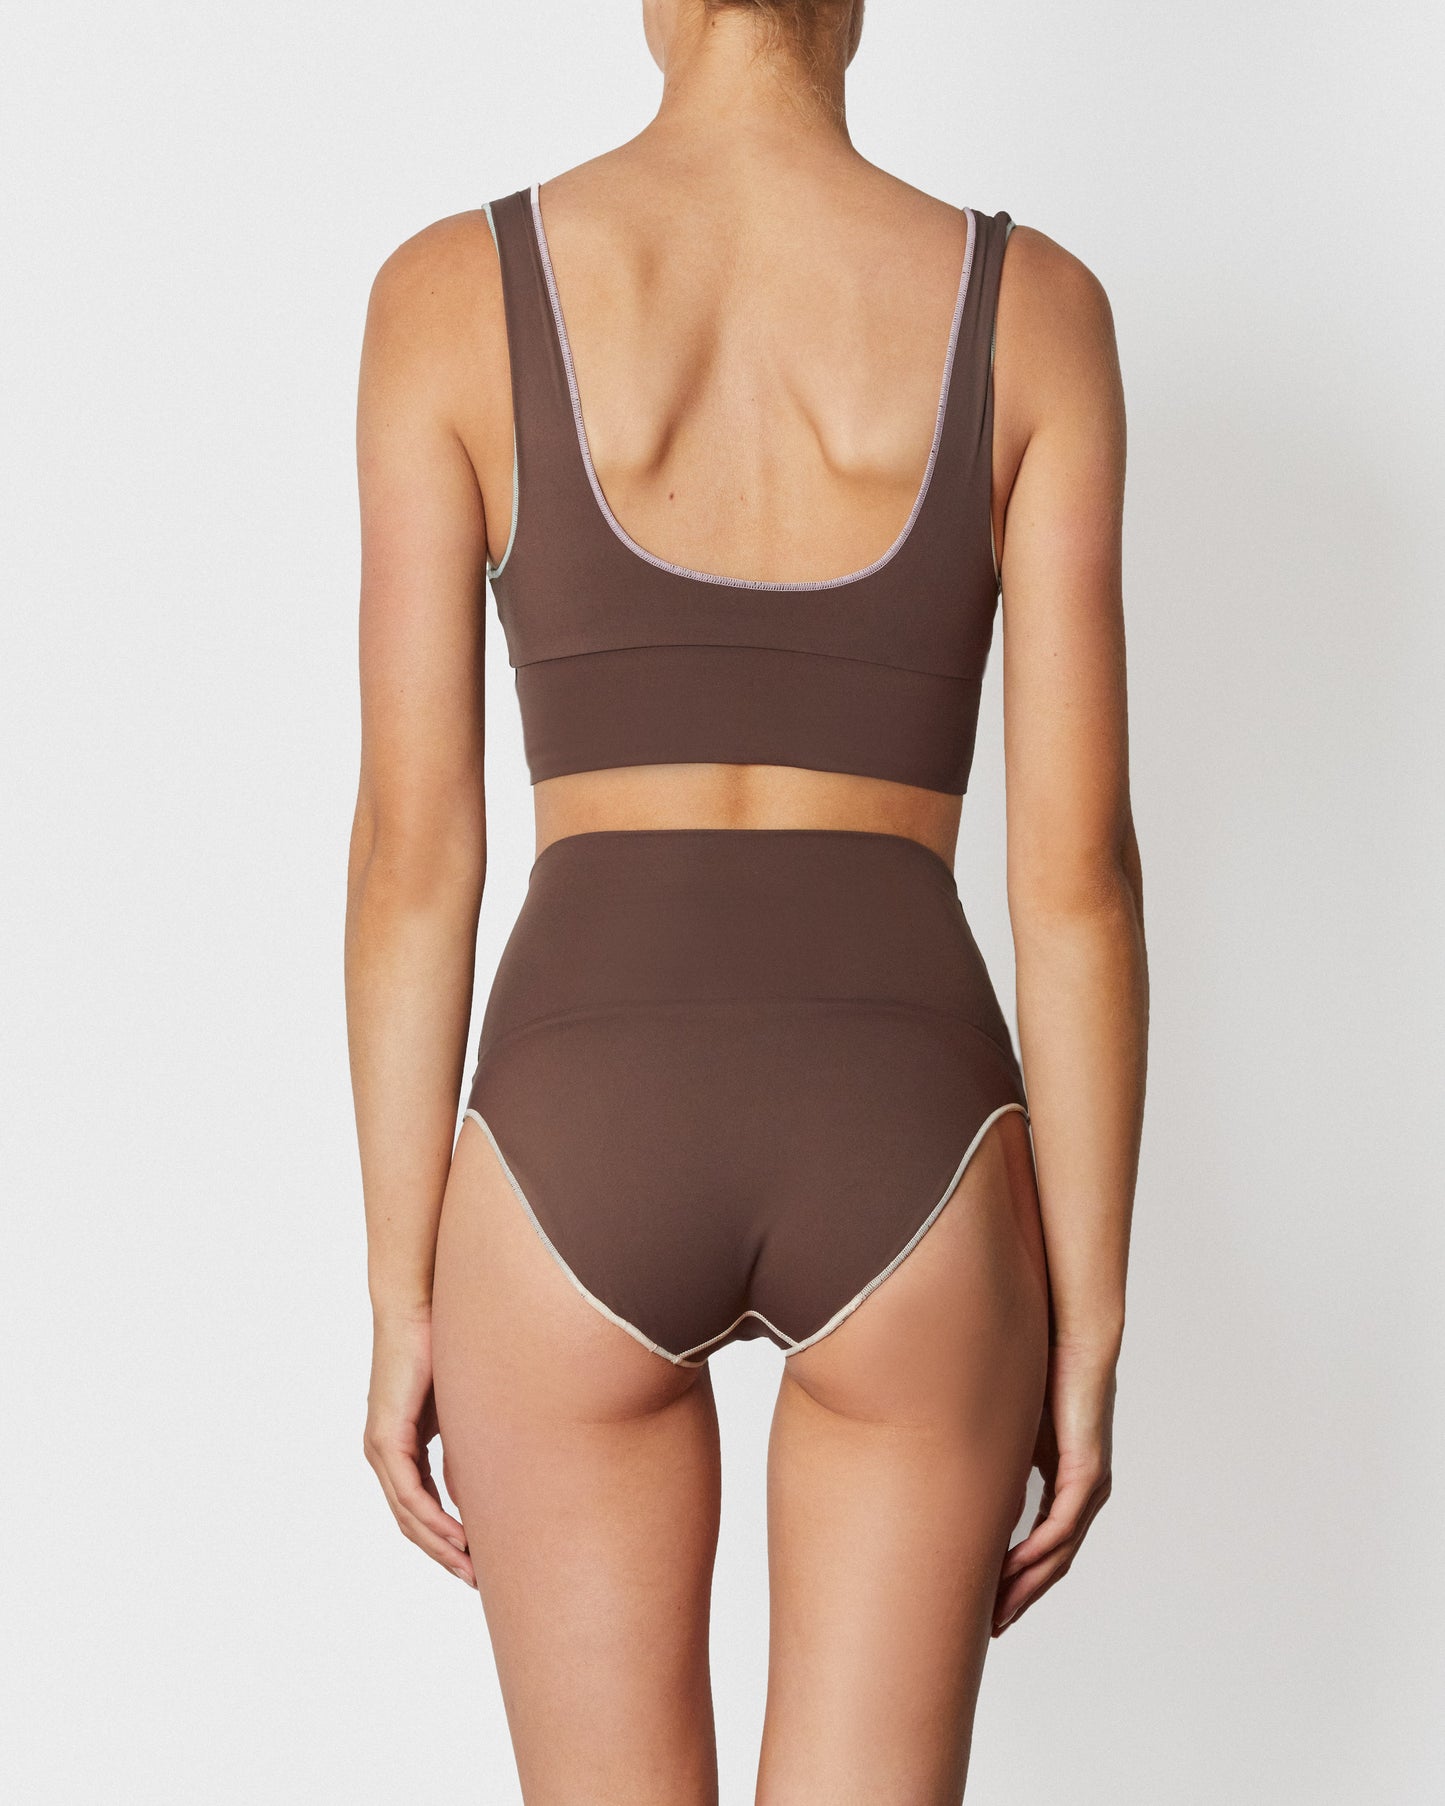 On body back of the Contour Crop Top - Fudgesicle